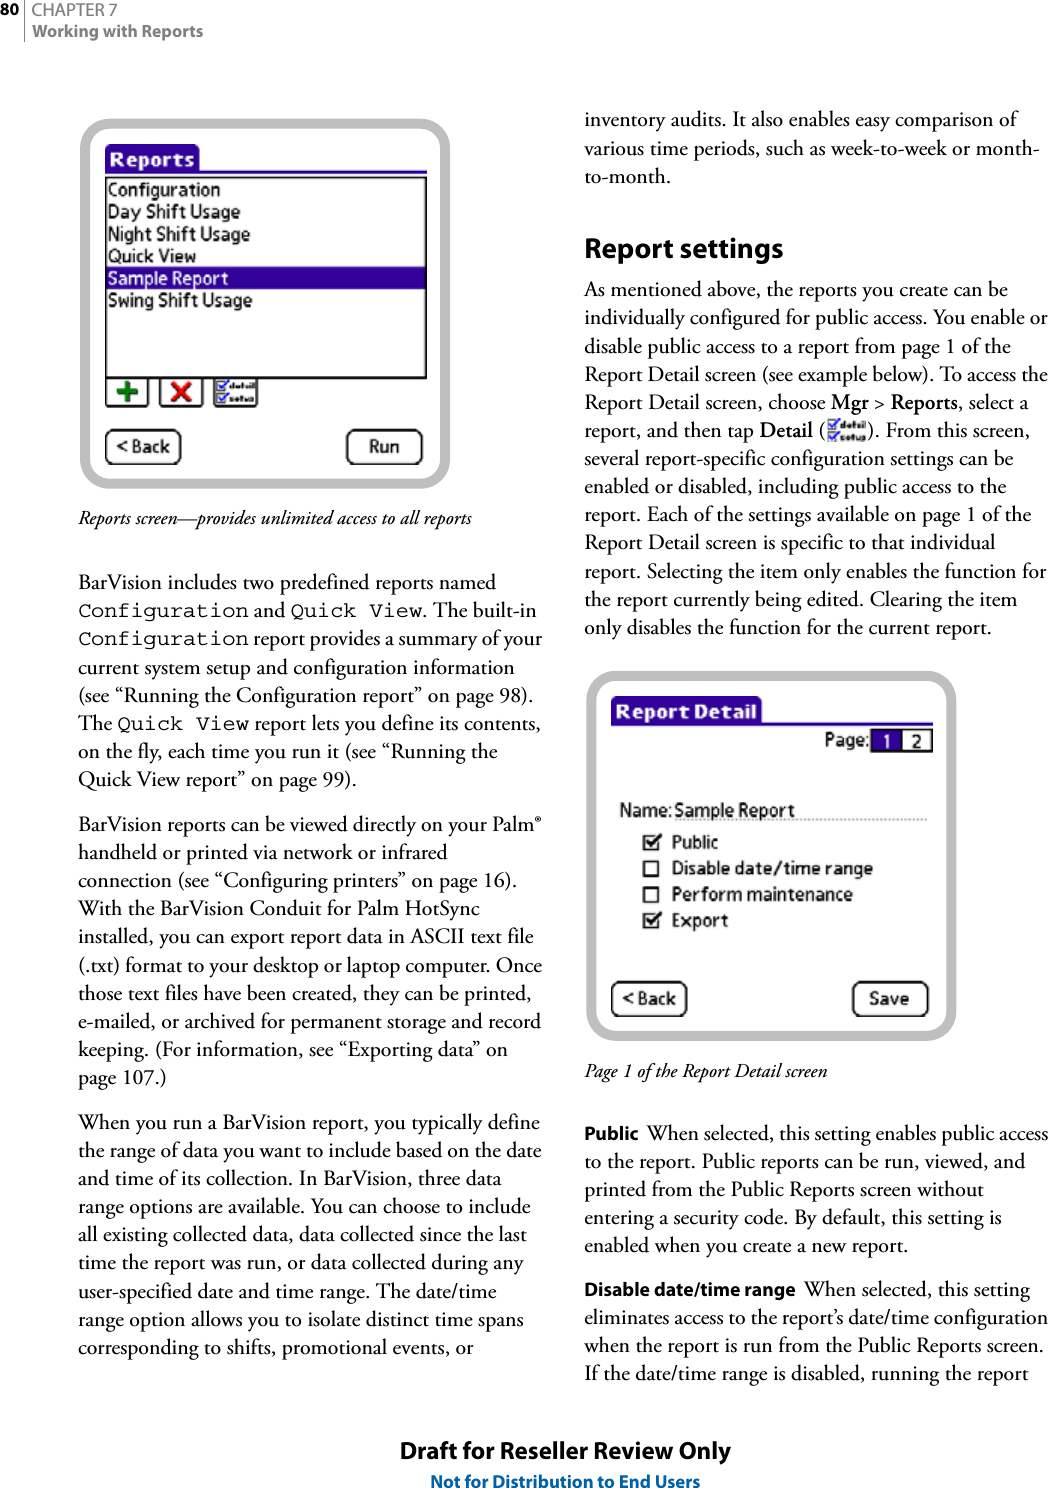 CHAPTER 780Working with ReportsDraft for Reseller Review OnlyNot for Distribution to End UsersReports screen—provides unlimited access to all reportsBarVision includes two predefined reports named Configuration and Quick View. The built-in Configuration report provides a summary of your current system setup and configuration information (see “Running the Configuration report” on page 98). The Quick View report lets you define its contents, on the fly, each time you run it (see “Running the Quick View report” on page 99).BarVision reports can be viewed directly on your Palm® handheld or printed via network or infrared connection (see “Configuring printers” on page 16). With the BarVision Conduit for Palm HotSync installed, you can export report data in ASCII text file (.txt) format to your desktop or laptop computer. Once those text files have been created, they can be printed, e-mailed, or archived for permanent storage and record keeping. (For information, see “Exporting data” on page 107.)When you run a BarVision report, you typically define the range of data you want to include based on the date and time of its collection. In BarVision, three data range options are available. You can choose to include all existing collected data, data collected since the last time the report was run, or data collected during any user-specified date and time range. The date/time range option allows you to isolate distinct time spans corresponding to shifts, promotional events, or inventory audits. It also enables easy comparison of various time periods, such as week-to-week or month-to-month.Report settingsAs mentioned above, the reports you create can be individually configured for public access. You enable or disable public access to a report from page 1 of the Report Detail screen (see example below). To access the Report Detail screen, choose Mgr &gt; Reports, select a report, and then tap Detail ( ). From this screen, several report-specific configuration settings can be enabled or disabled, including public access to the report. Each of the settings available on page 1 of the Report Detail screen is specific to that individual report. Selecting the item only enables the function for the report currently being edited. Clearing the item only disables the function for the current report.Page 1 of the Report Detail screenPublic  When selected, this setting enables public access to the report. Public reports can be run, viewed, and printed from the Public Reports screen without entering a security code. By default, this setting is enabled when you create a new report.Disable date/time range  When selected, this setting eliminates access to the report’s date/time configuration when the report is run from the Public Reports screen. If the date/time range is disabled, running the report 